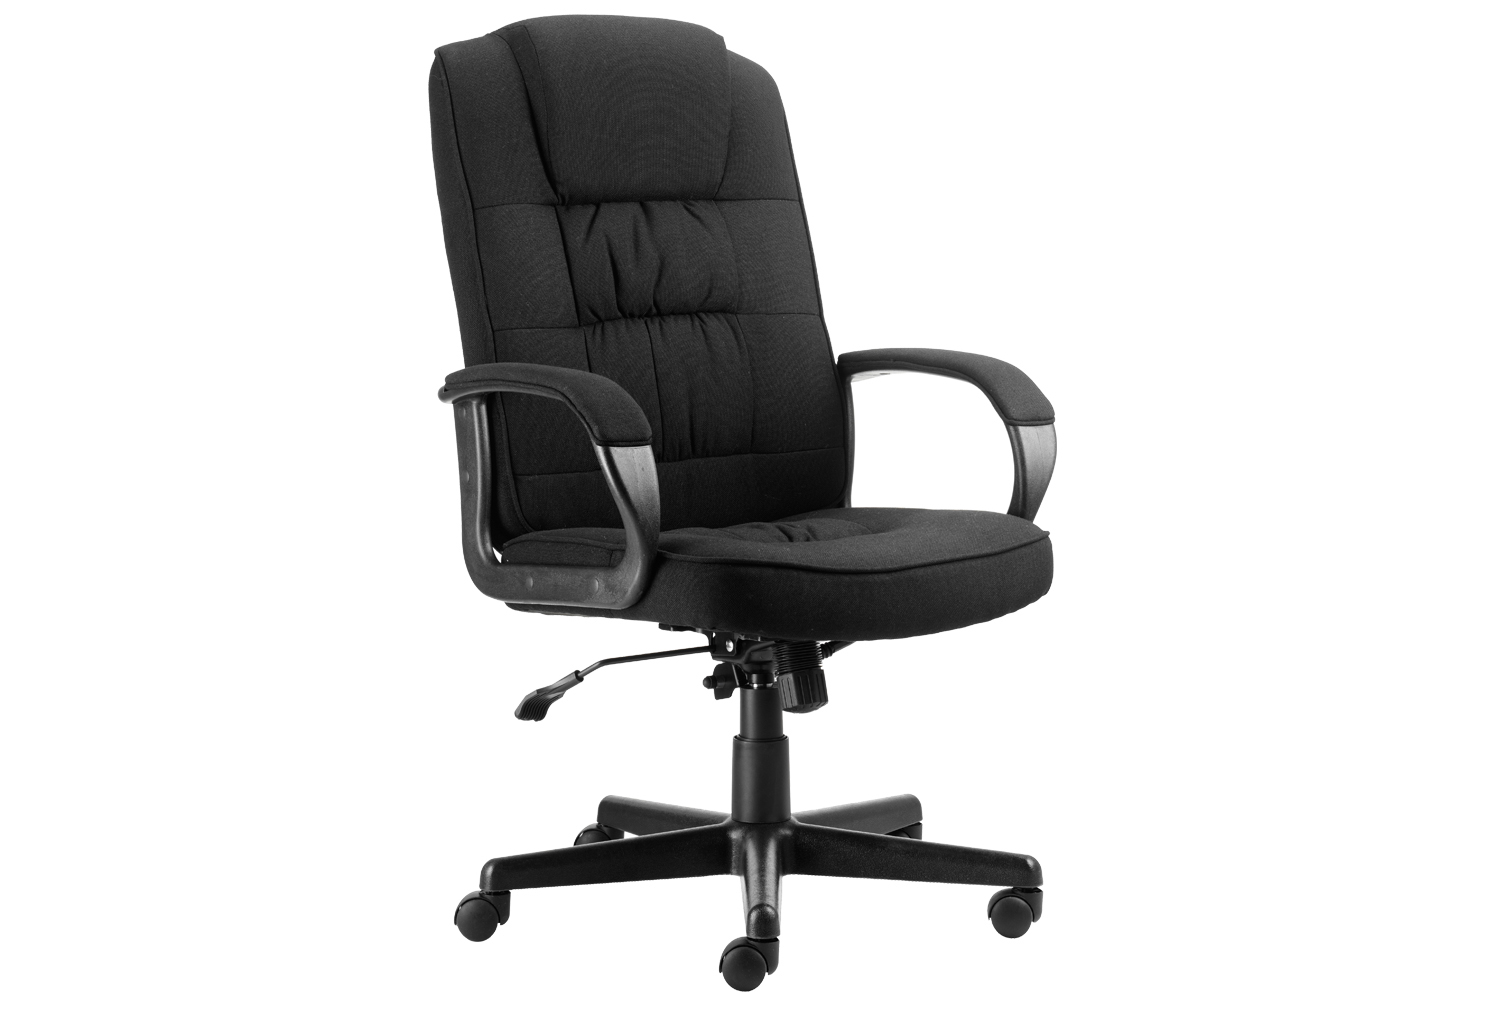 Muscat Fabric Executive Office Chair, Black, Express Delivery